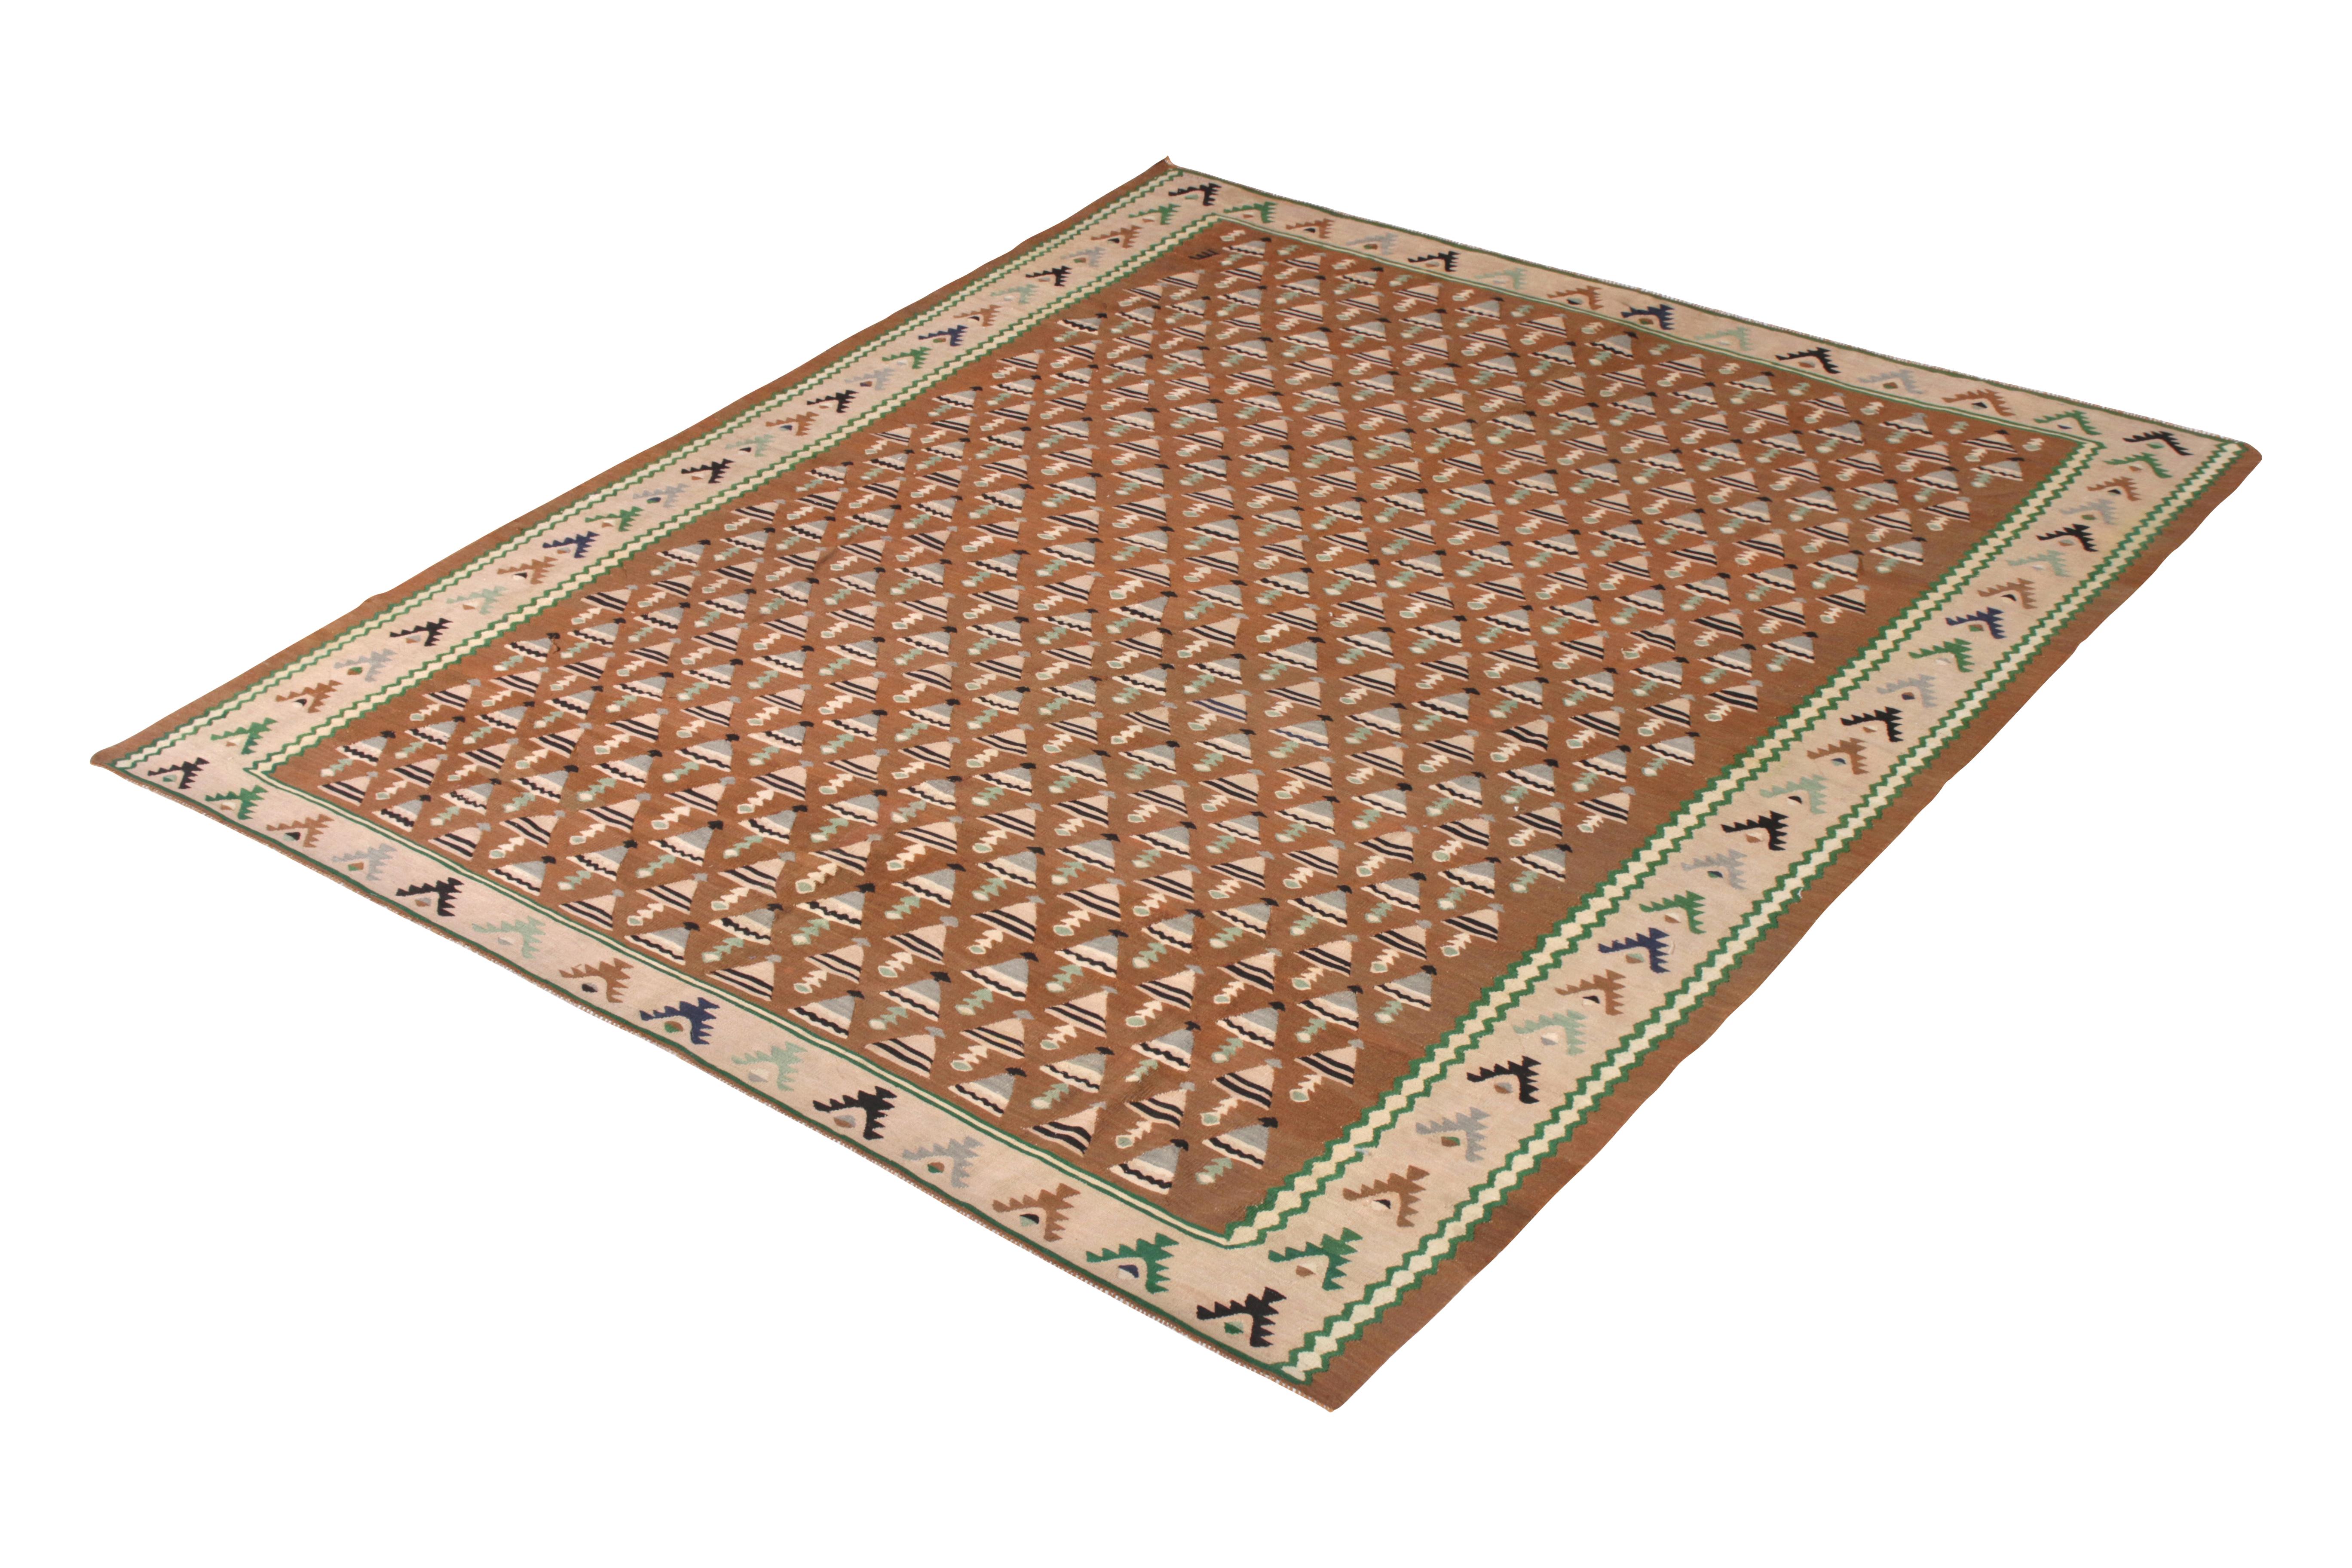 Handwoven in a wool flat weave originating from Turkey circa 1950-1960, this vintage Kilim rug enjoys a mid-century geometric design in a rare colorway, playing a muted beige-pink hue in the border and field geometry with whimsical hues of blue and